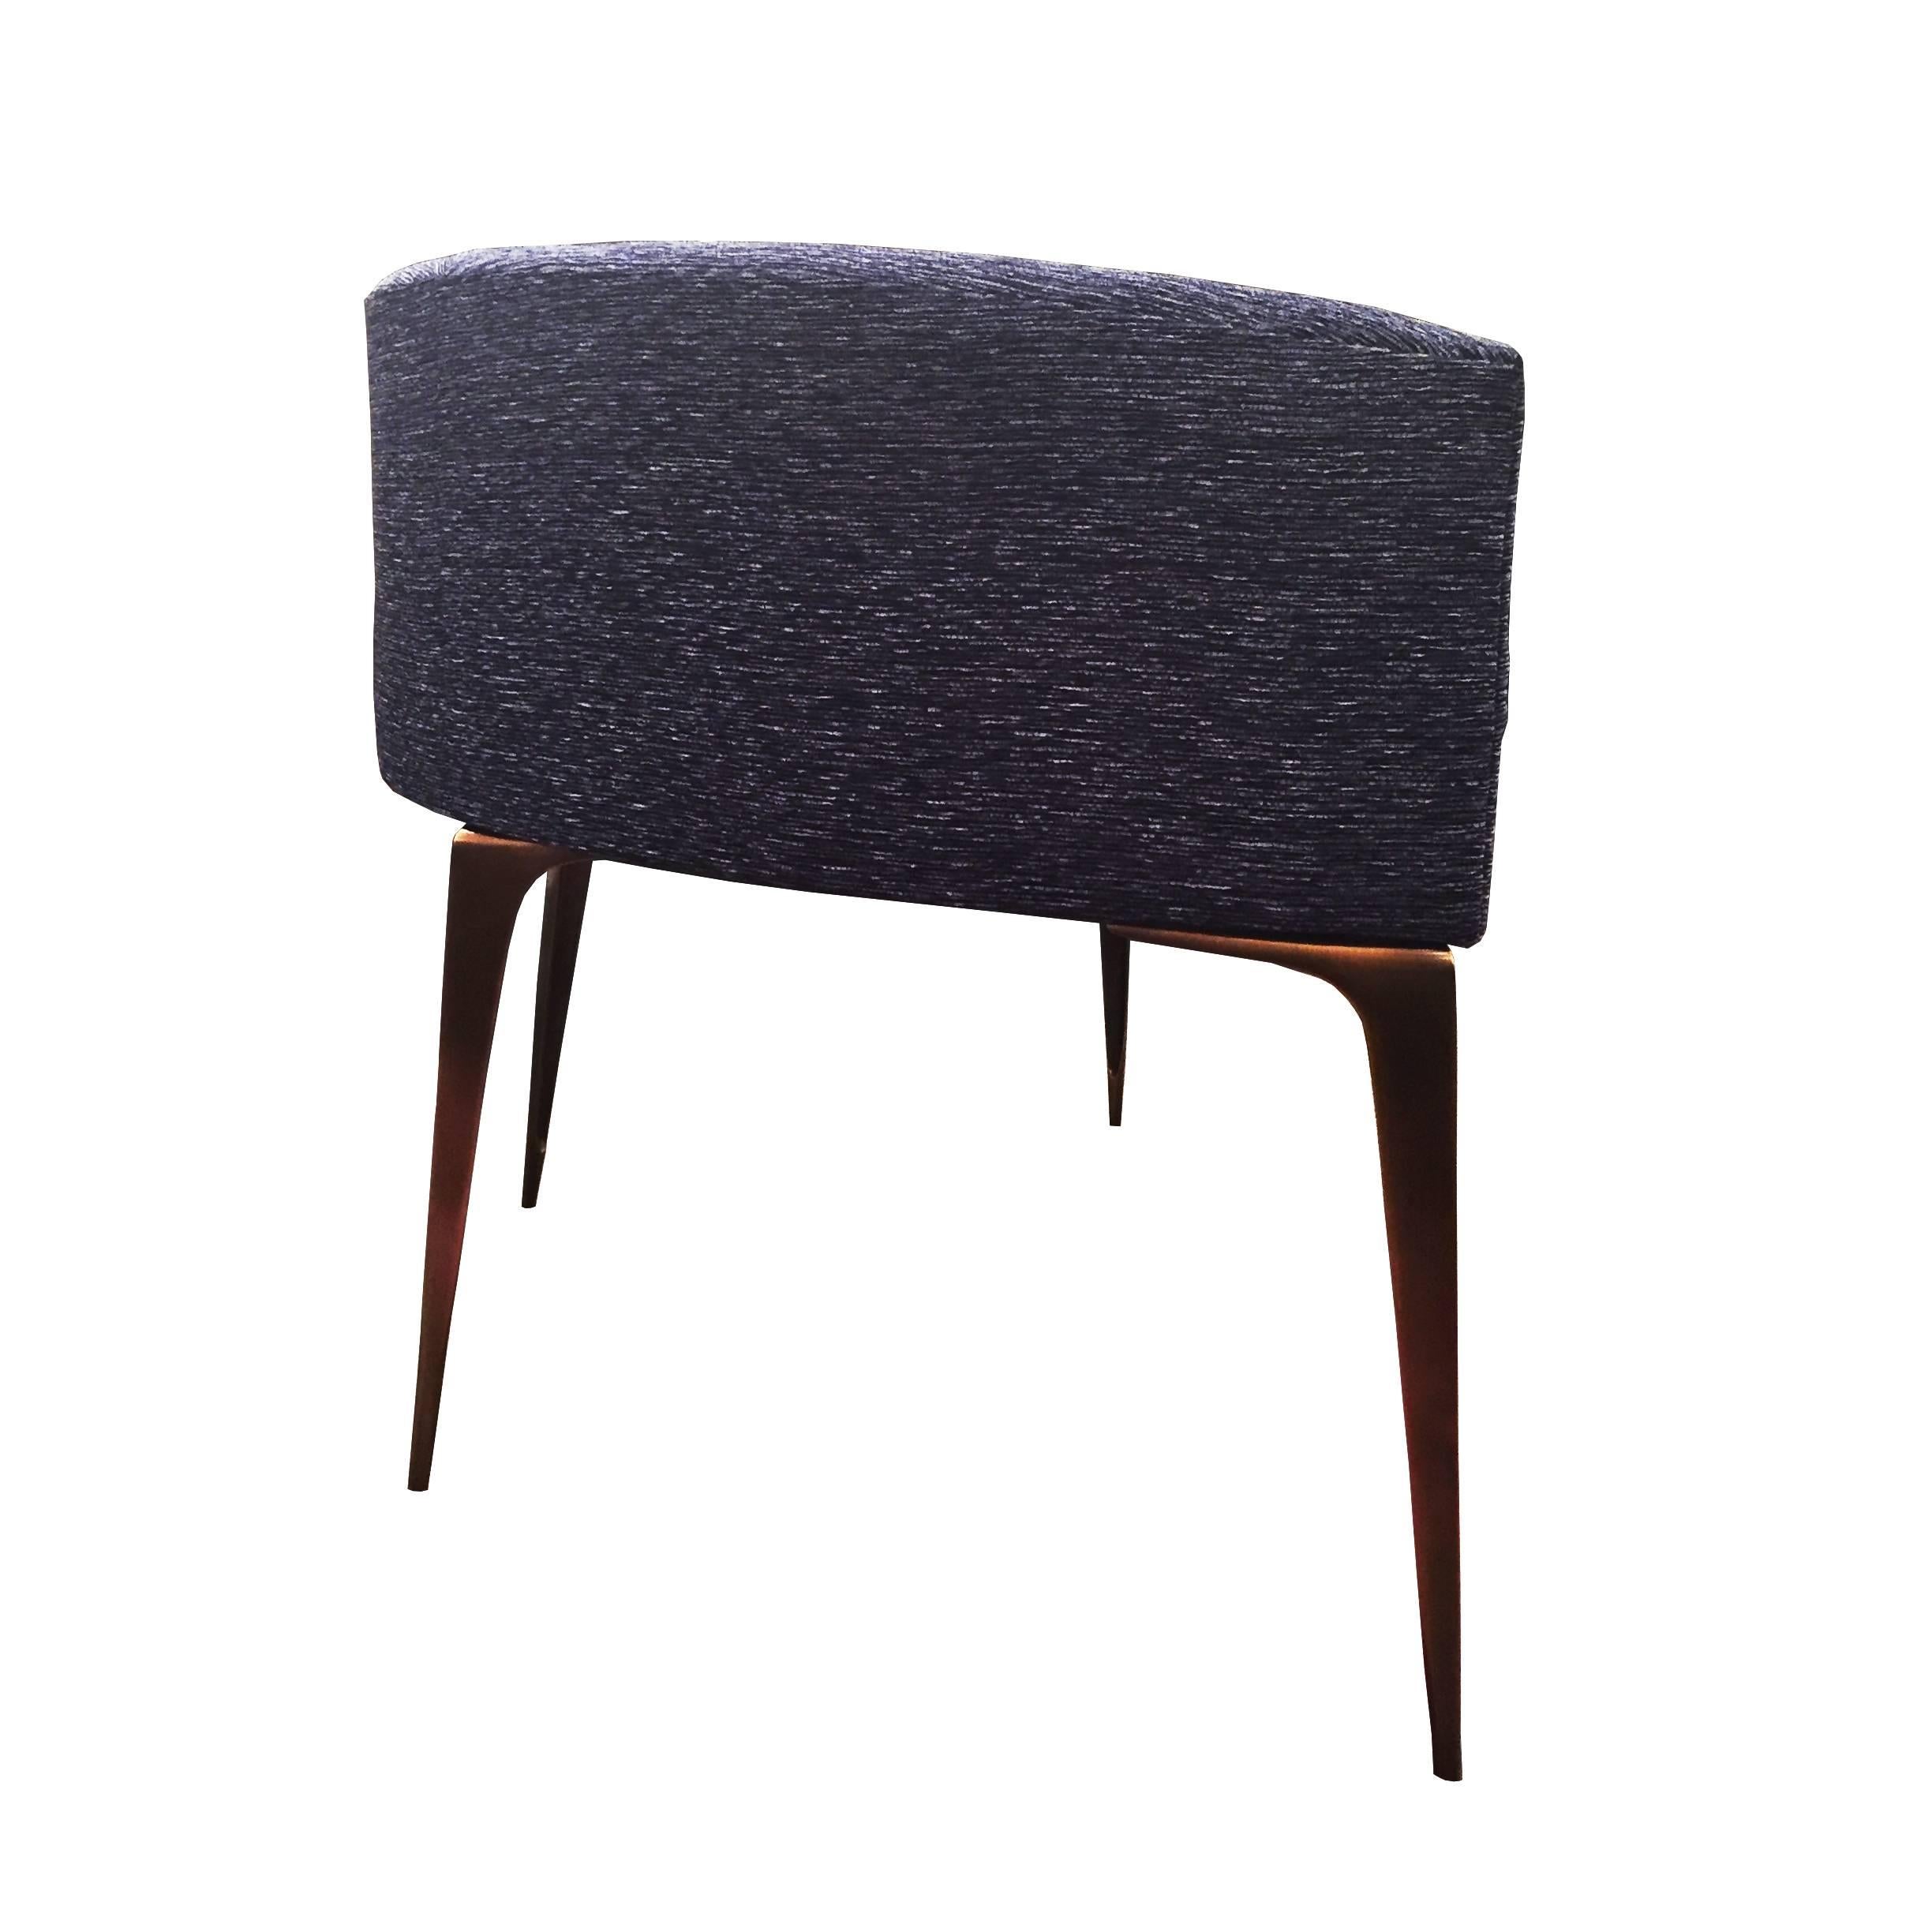 The slice ottoman is the latest versatile concept in casual seating by Irwin Feld for CF Modern. Made exclusively in New York, the slice features our hand lathed solid brass stiletto legs and a low back . Shown in Arc-Com sapphire chenille.